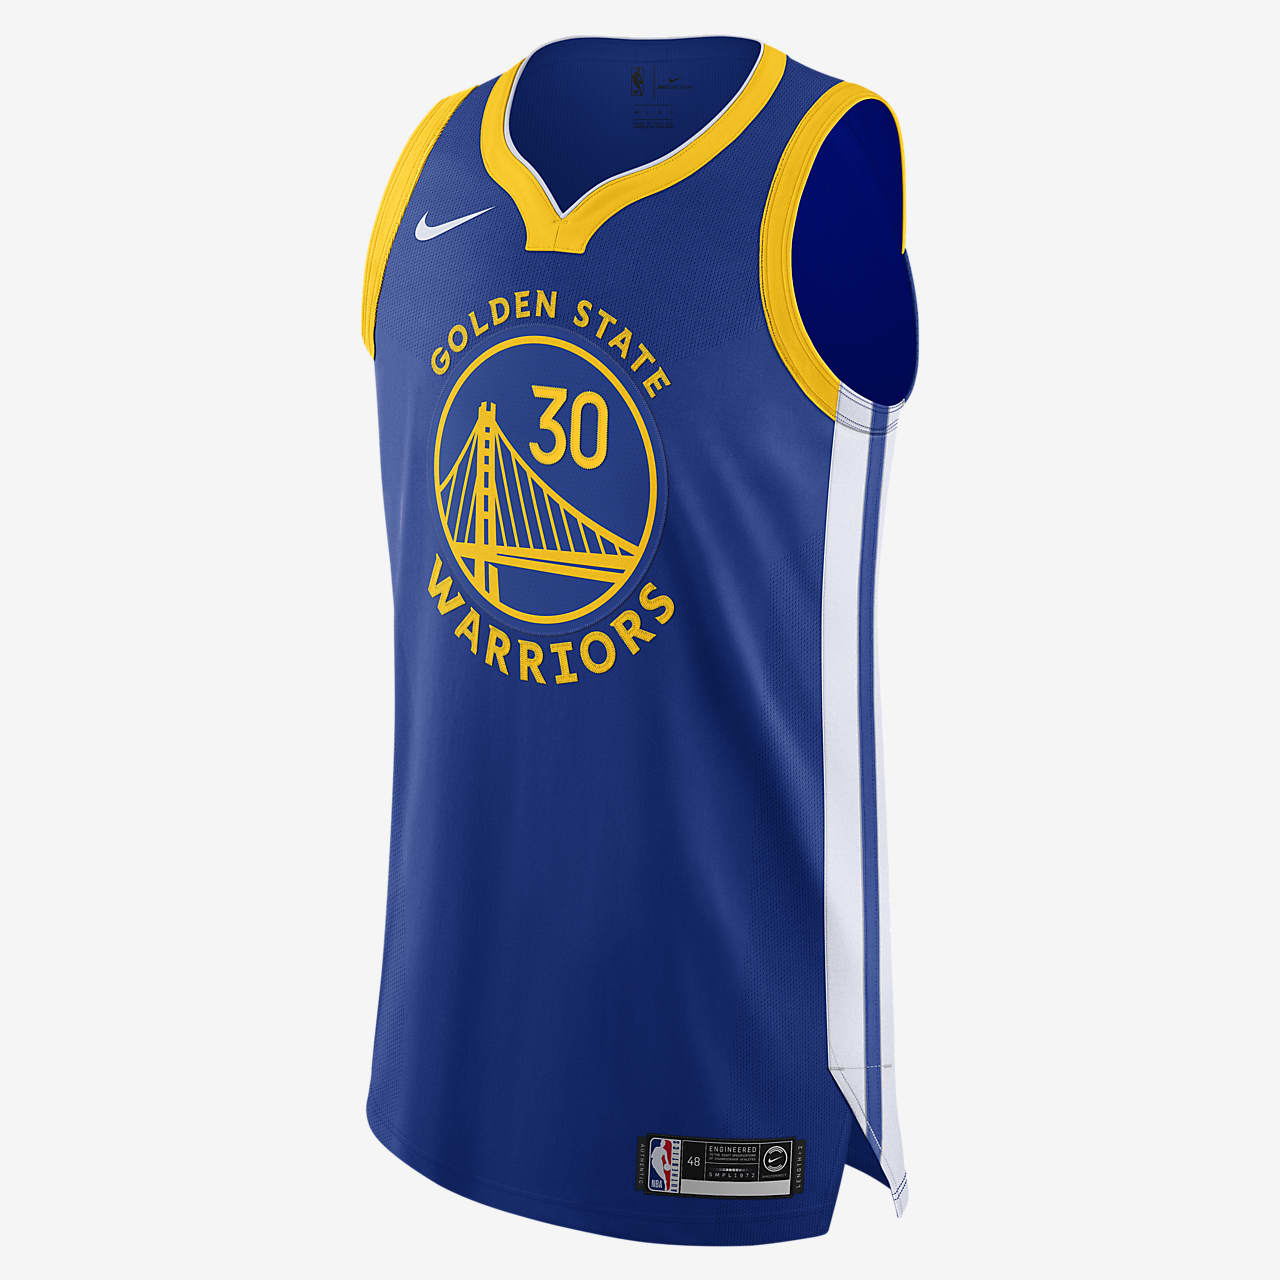 Icon Edition Nike NBA Authentic Jersey 